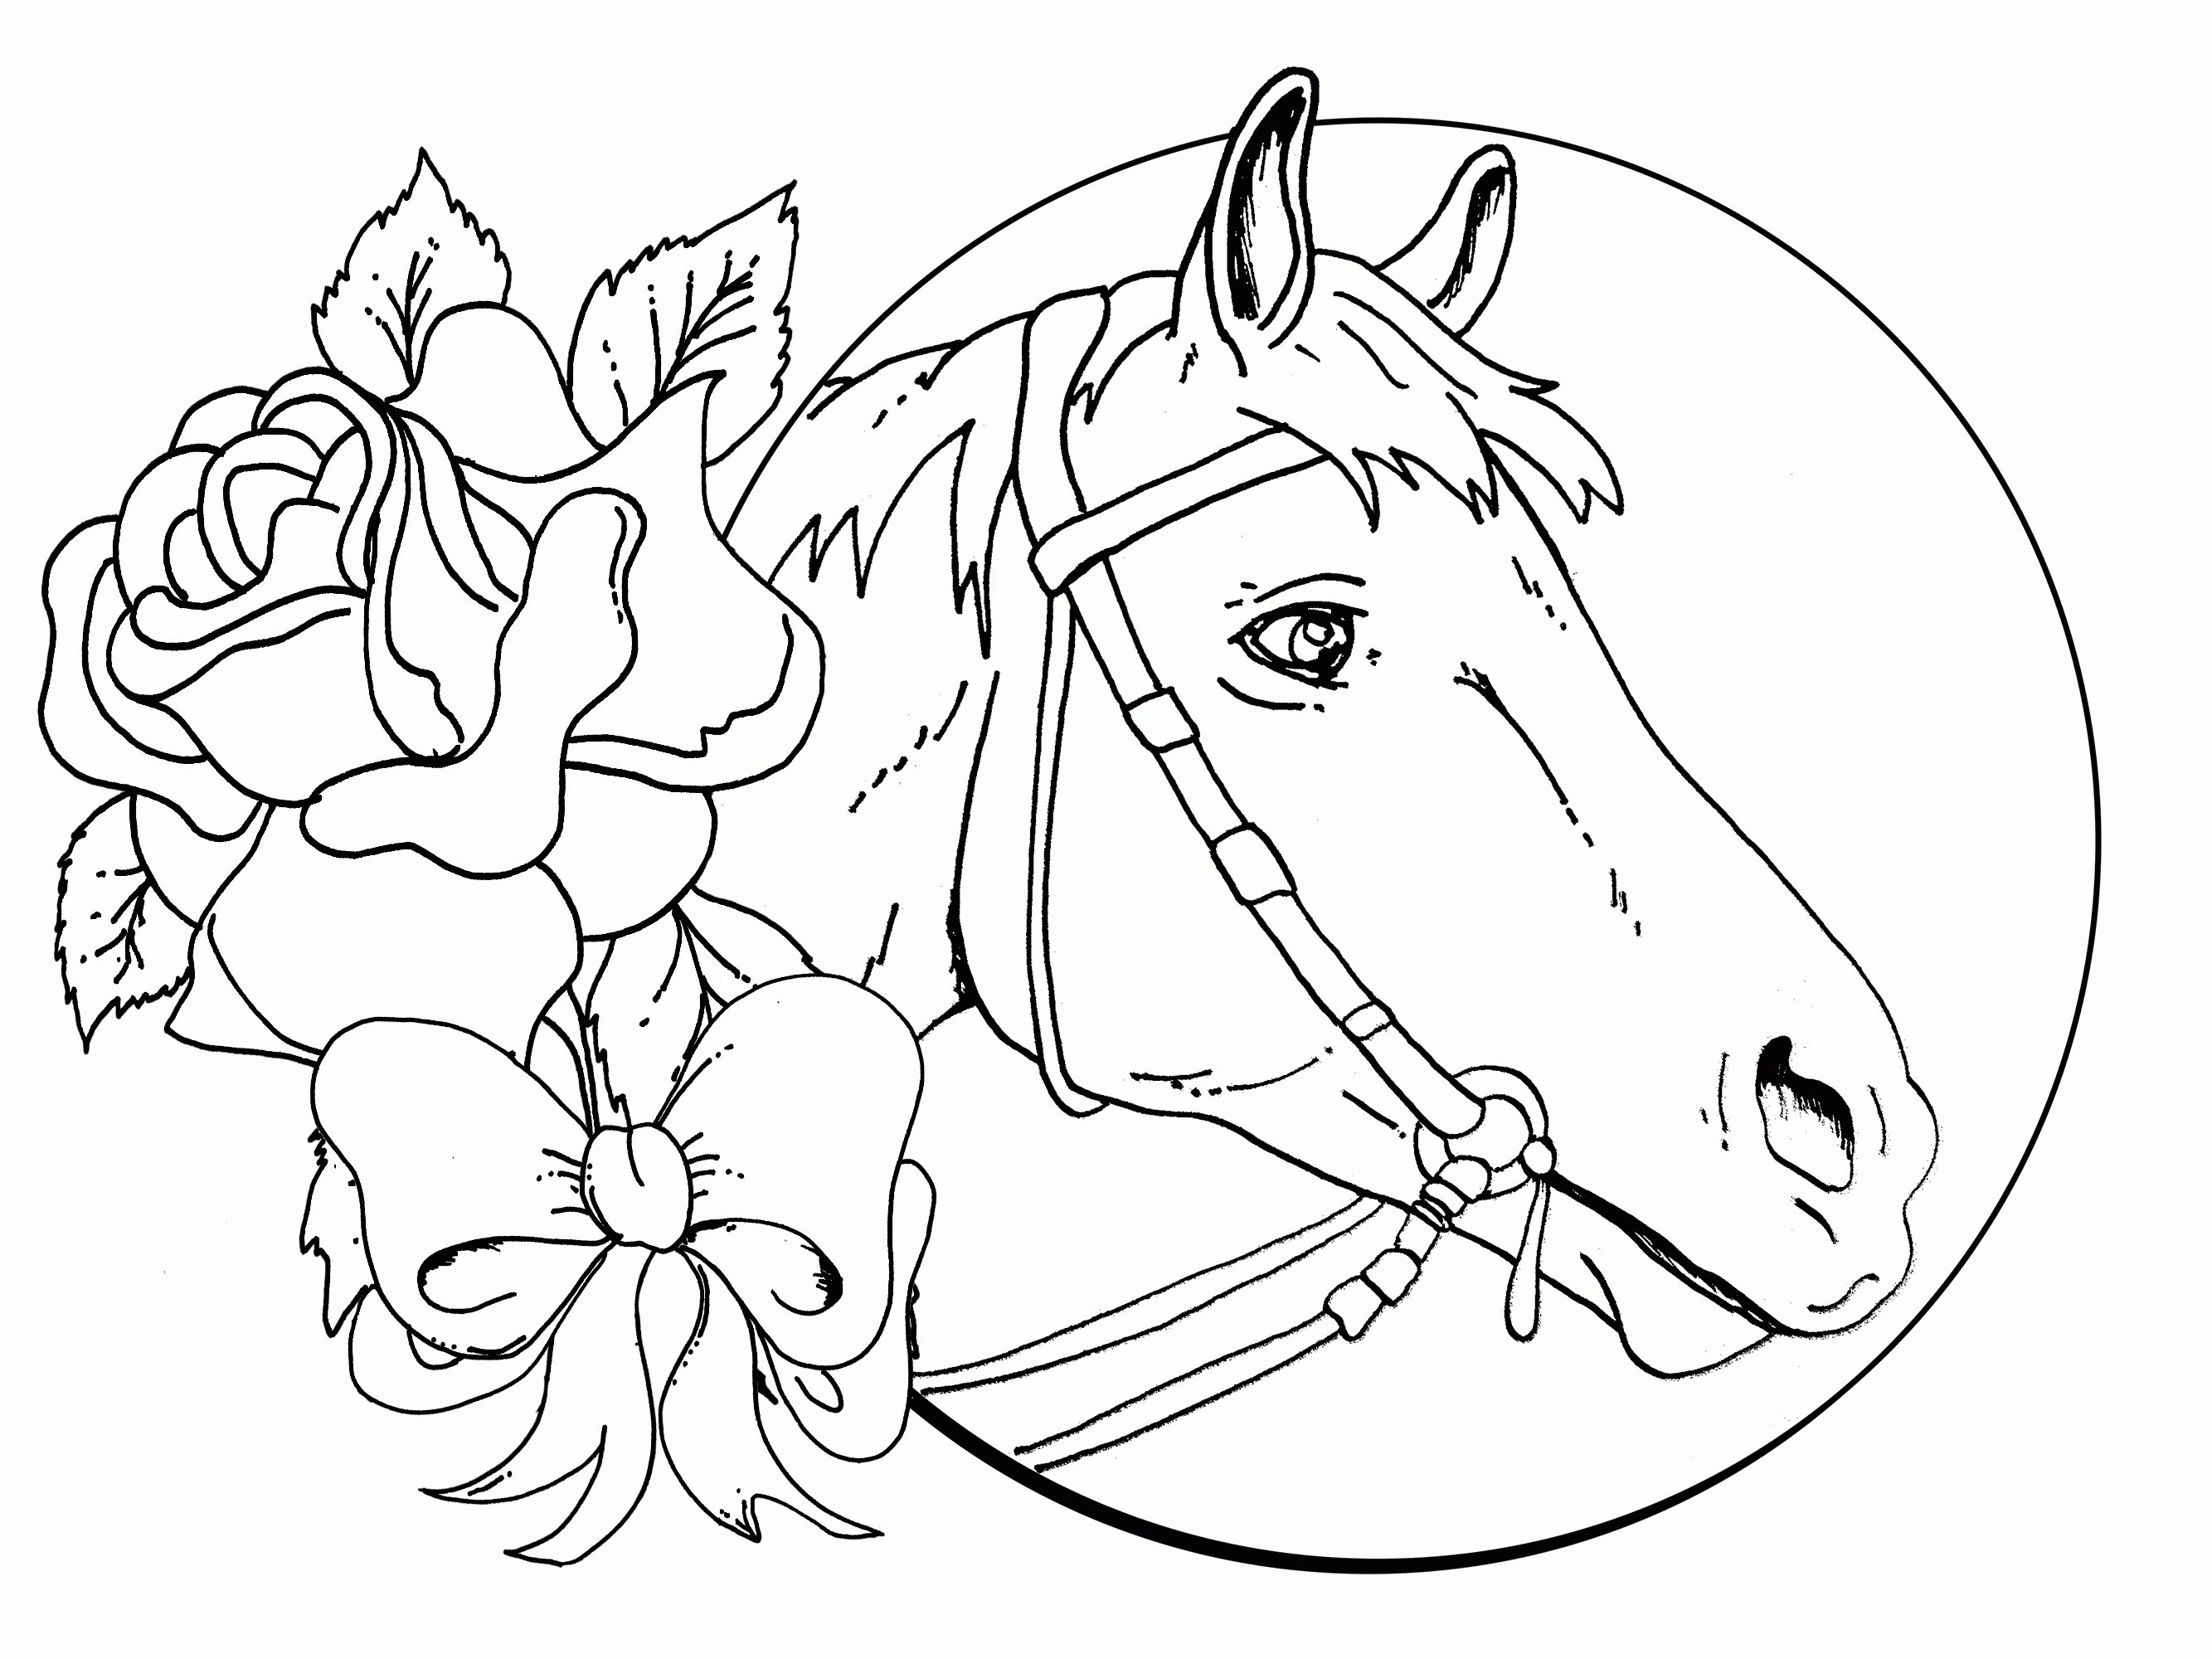 Coloring Pages: Horses Coloring Pages Free Coloring Pages Horse ...